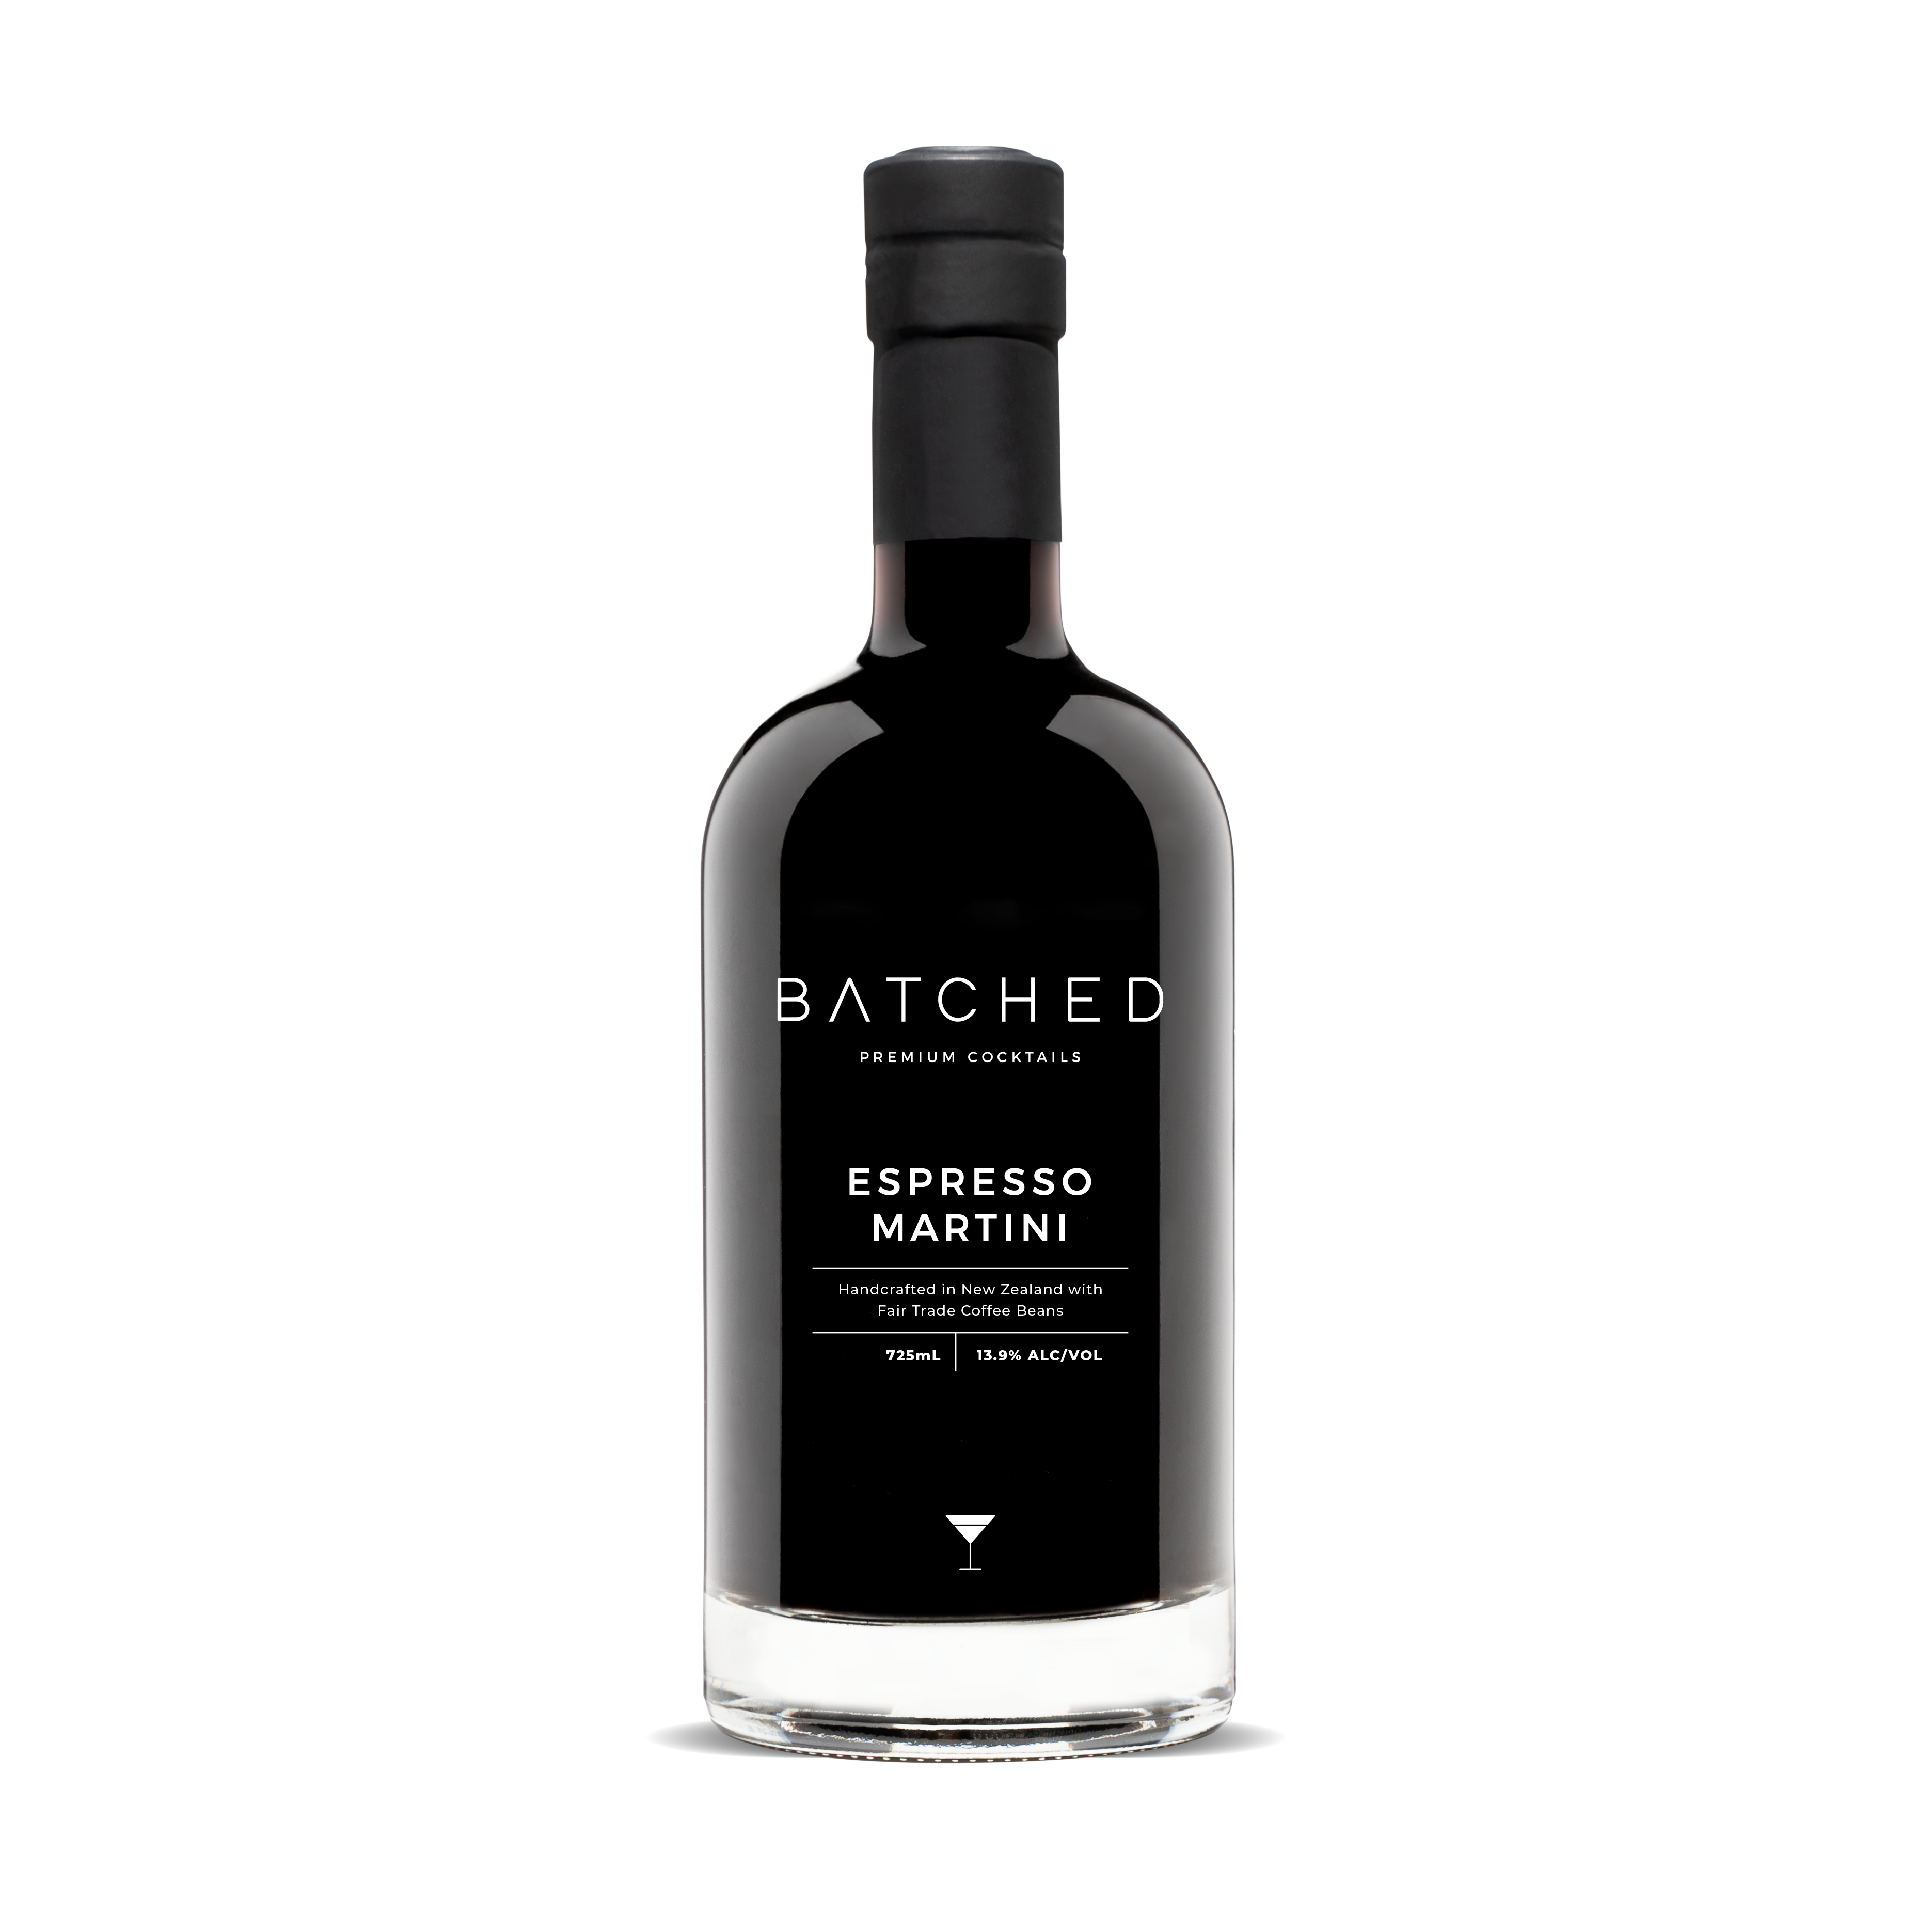 Batched Espresso Martini bottle with blank background